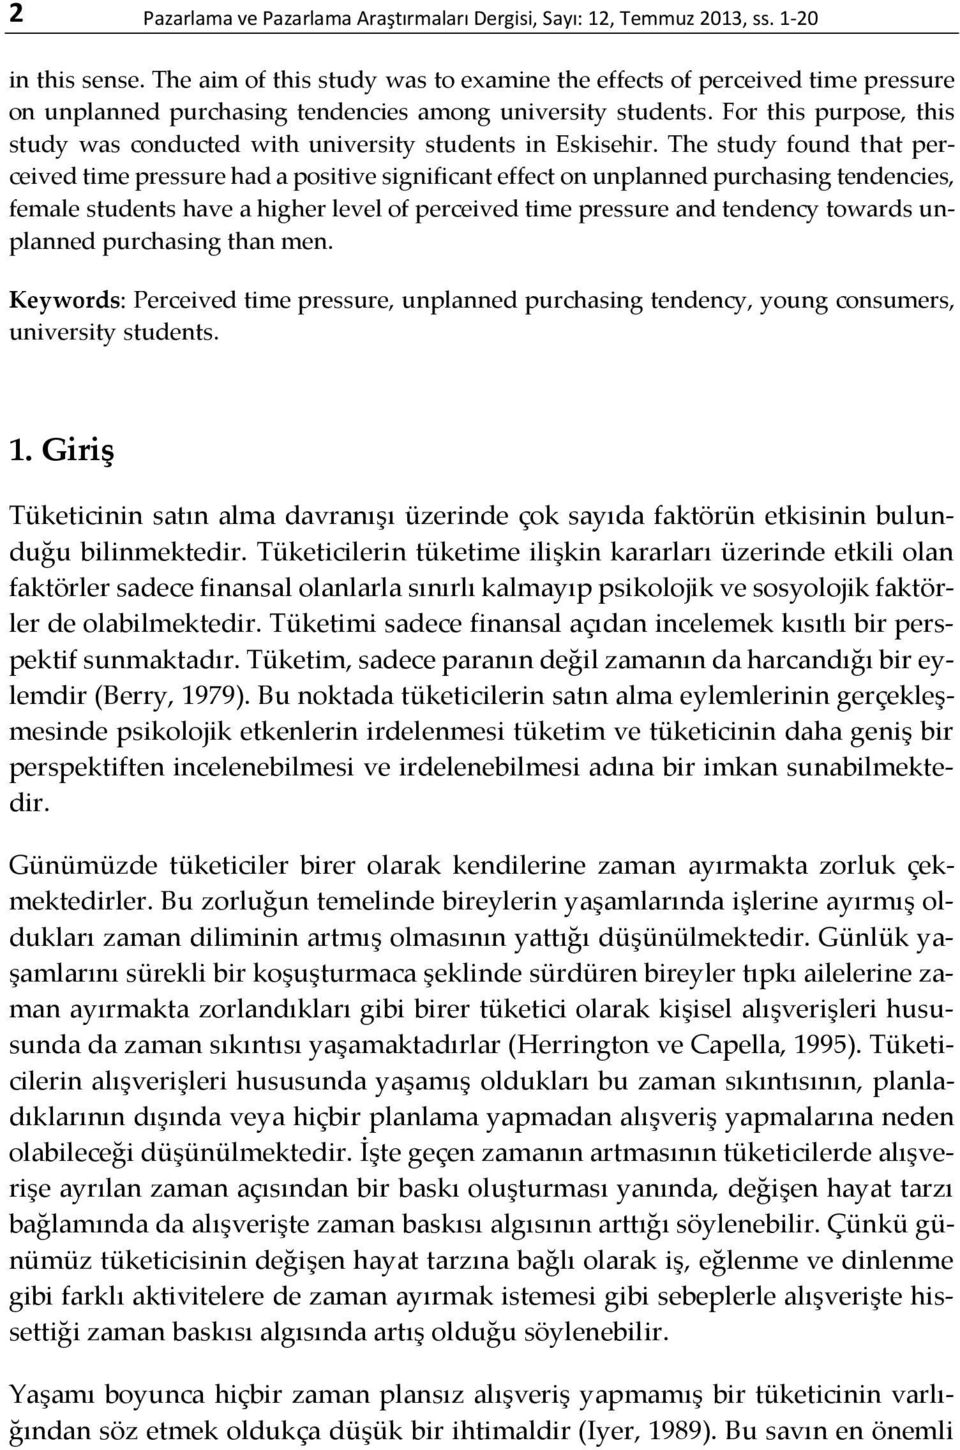 For this purpose, this study was conducted with university students in Eskisehir.